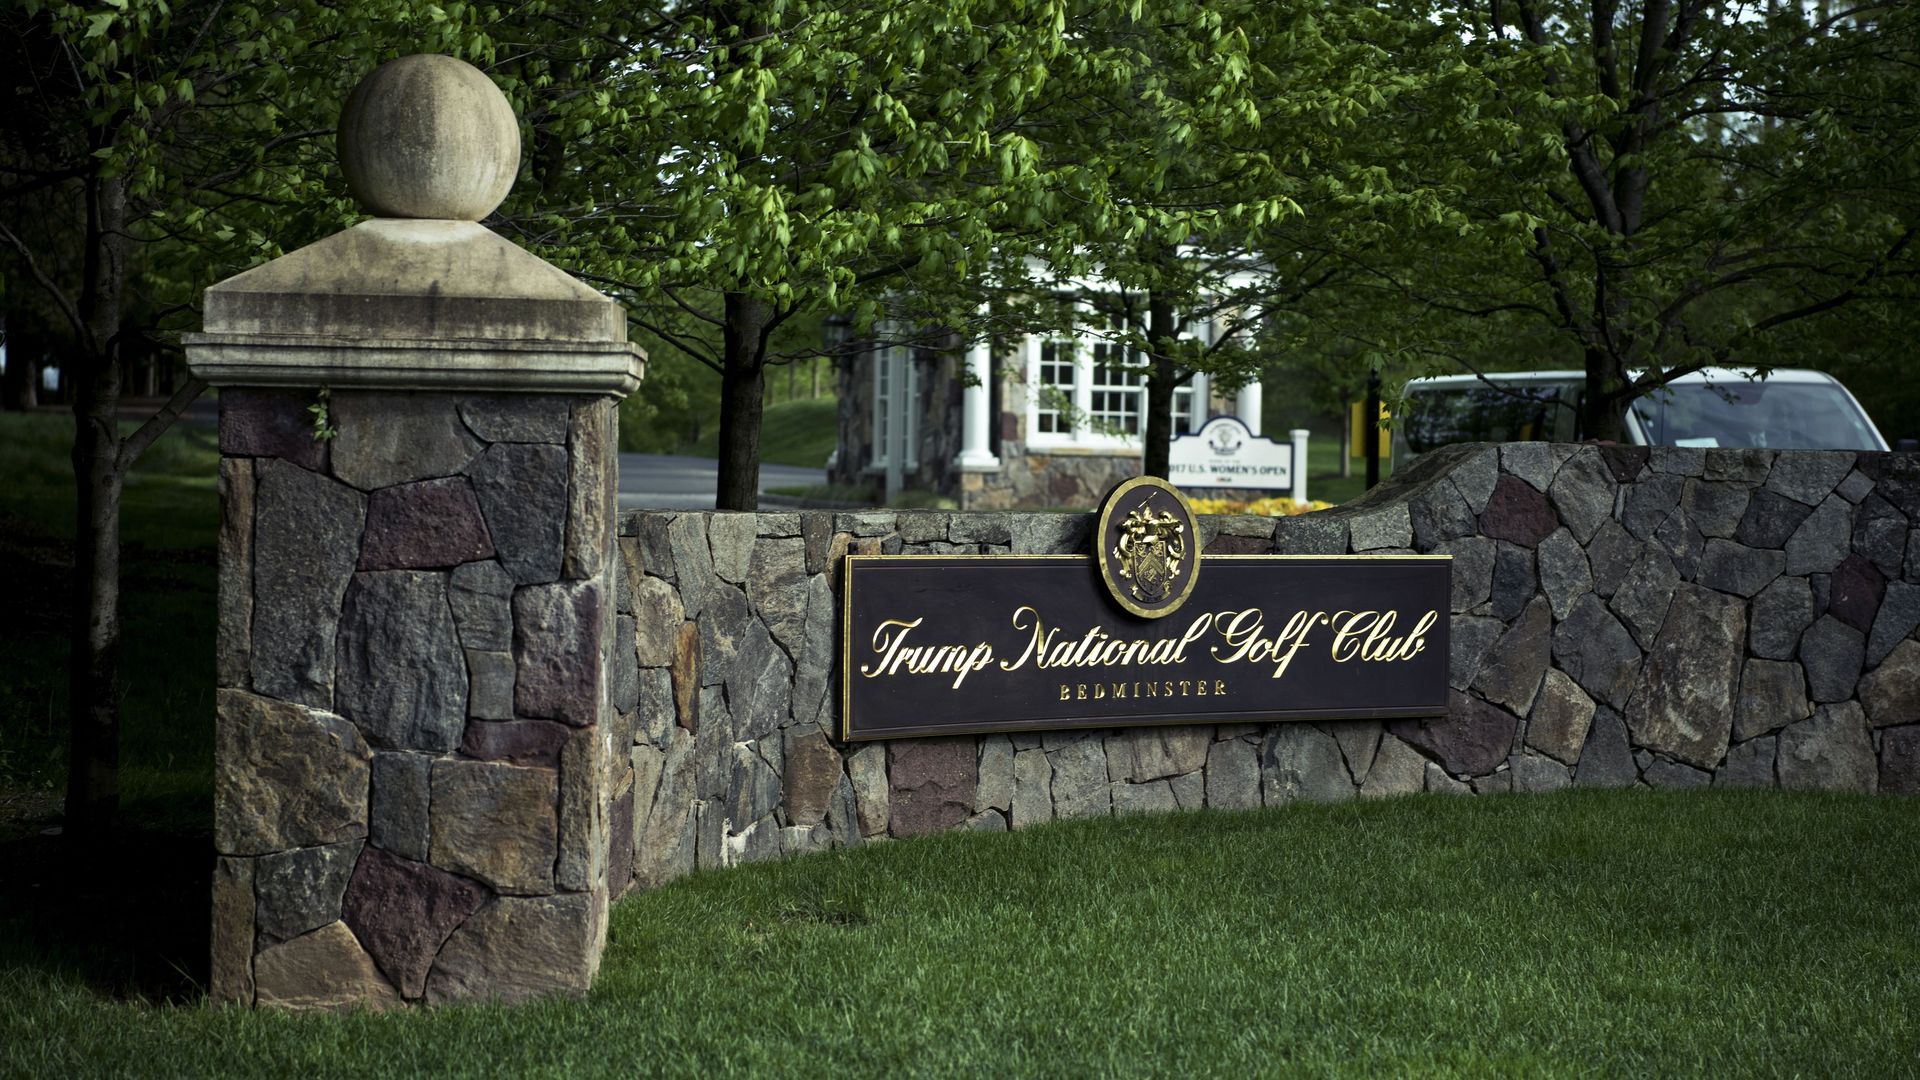 A view of the Trump National Golf Club in Bedminster, New Jersey, in 2017.